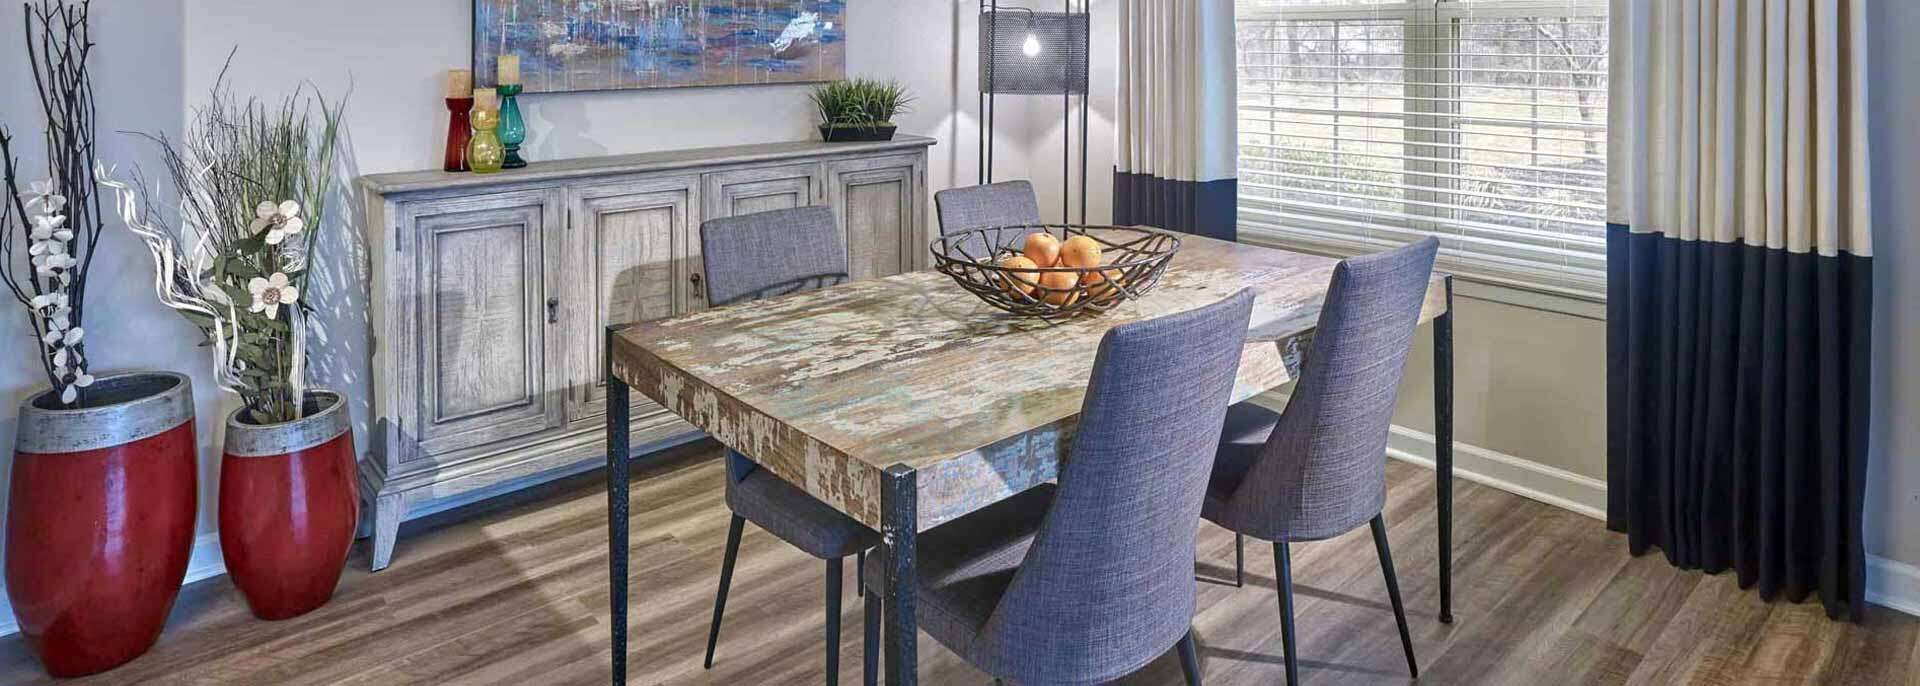 Dining area with hardwood style floors and natural light at Lansdale, PA apartments